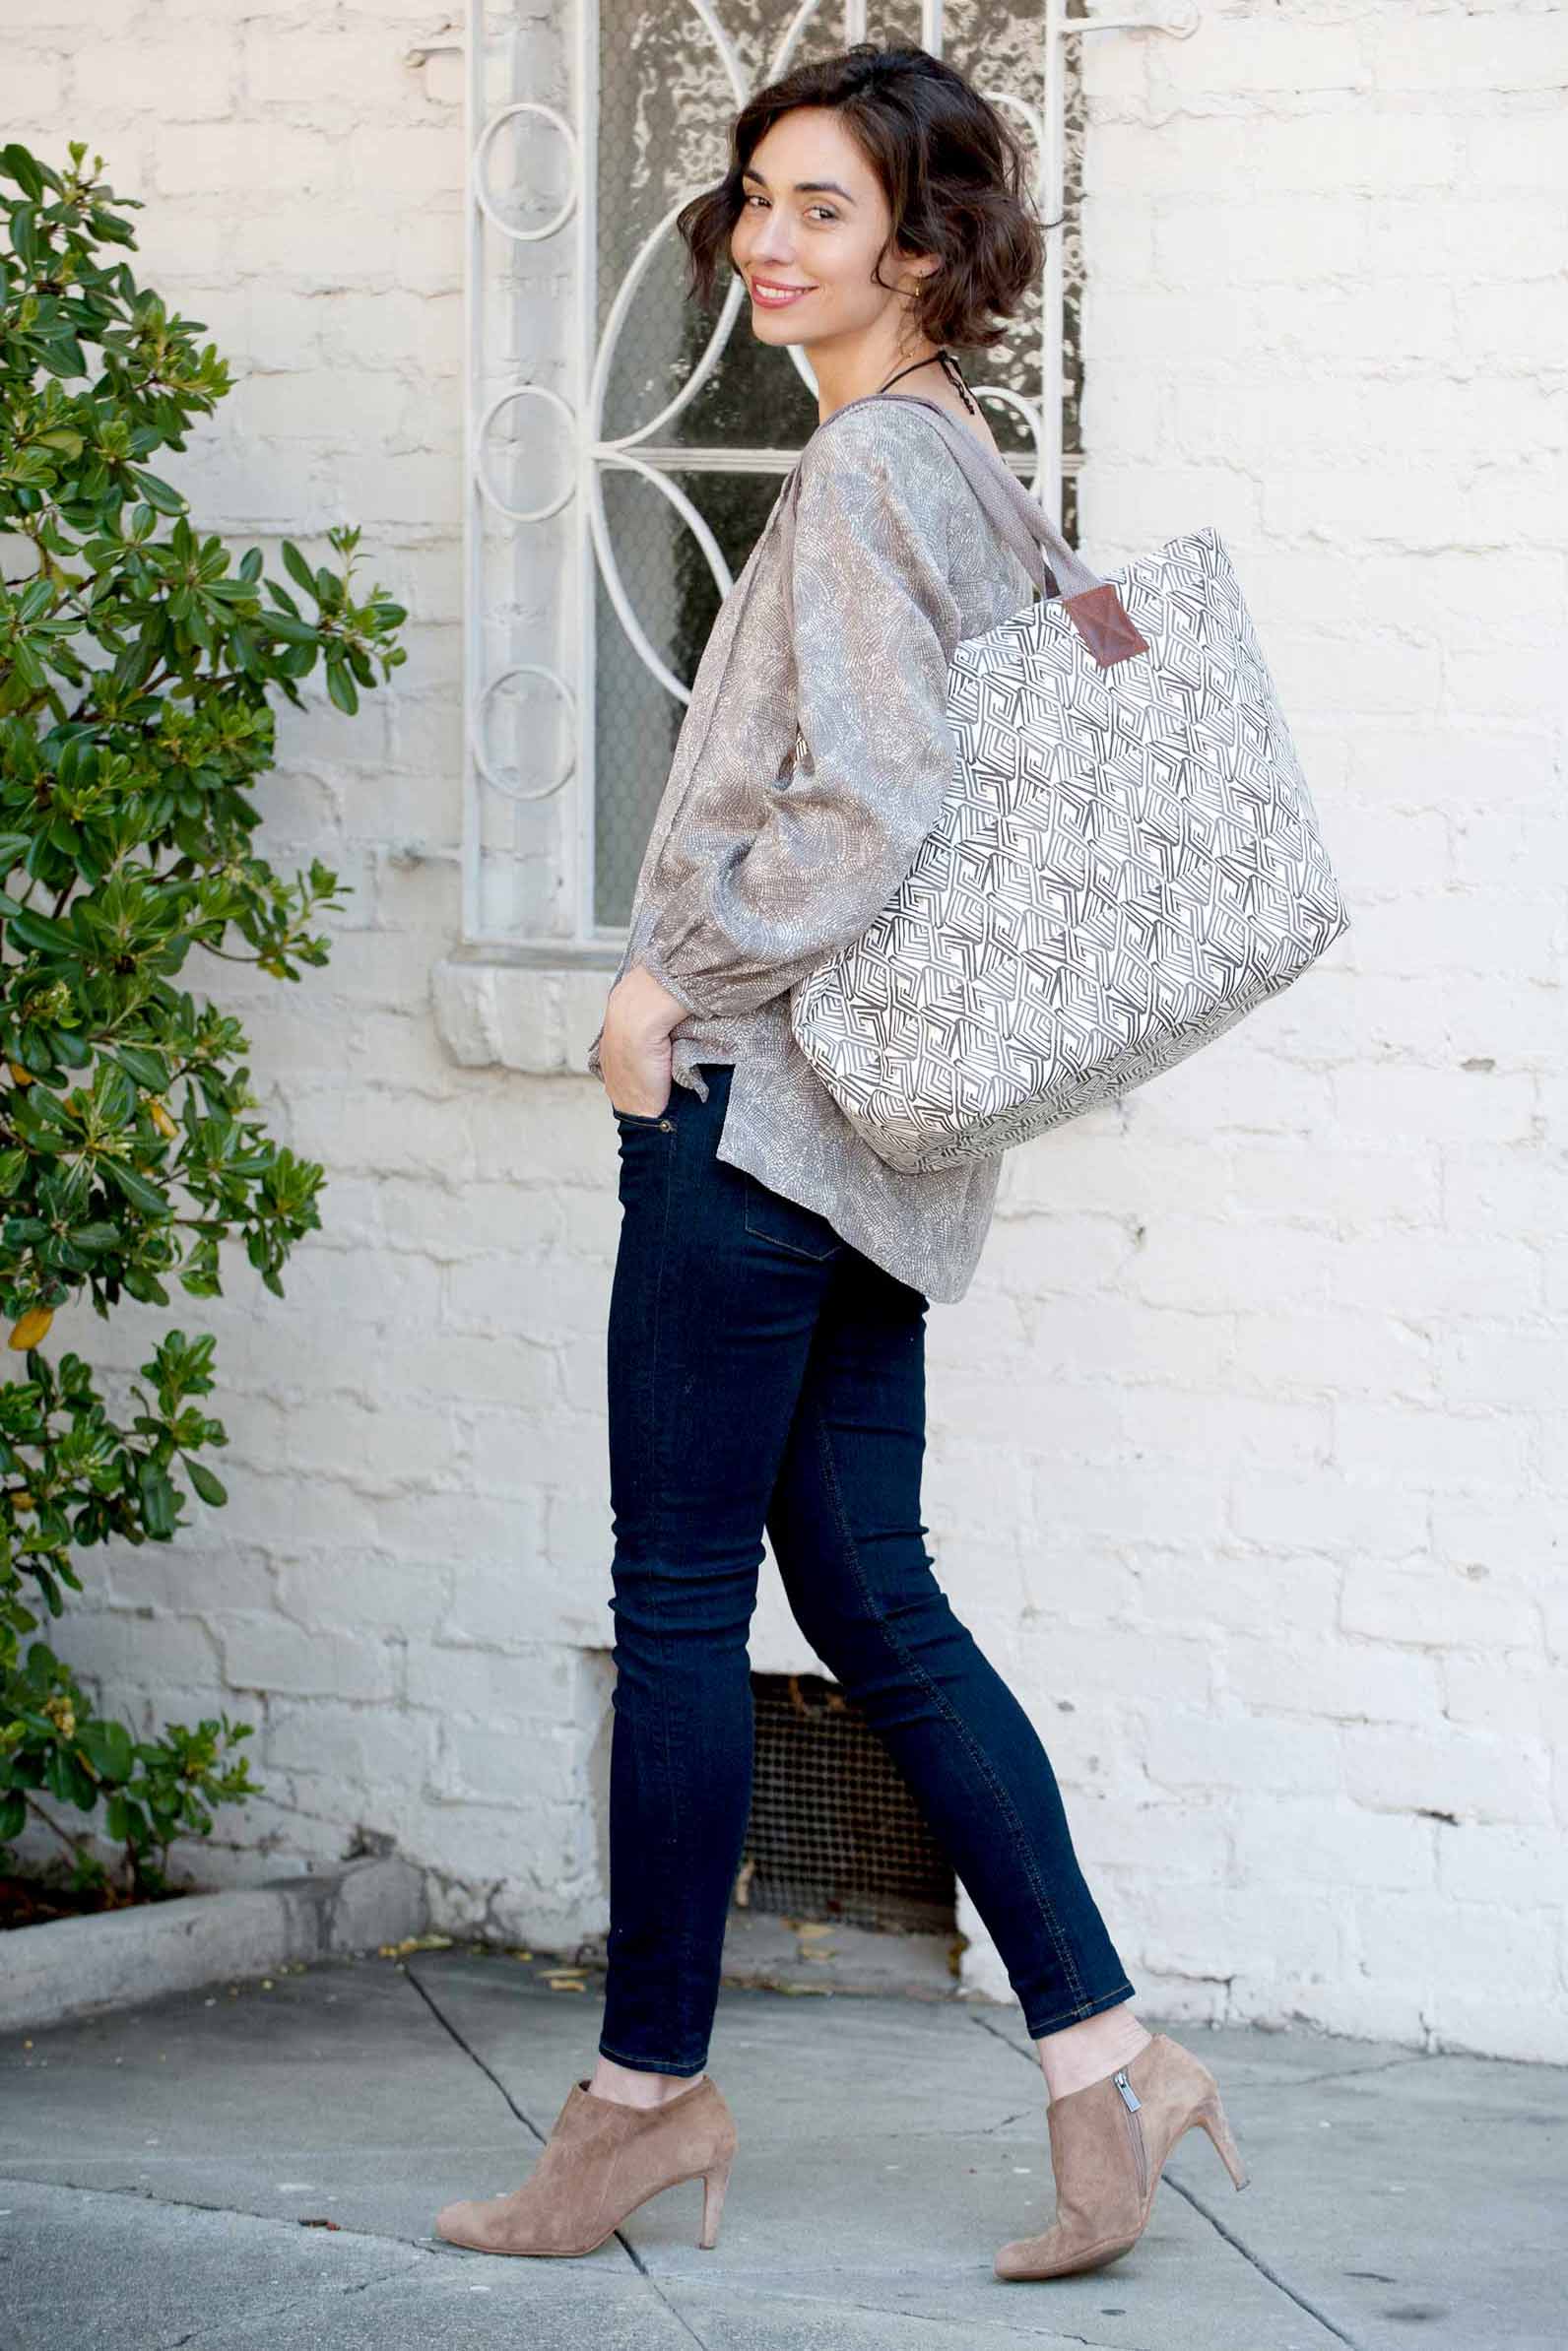 woman wearing grey tunic and grey tote bag with jeans